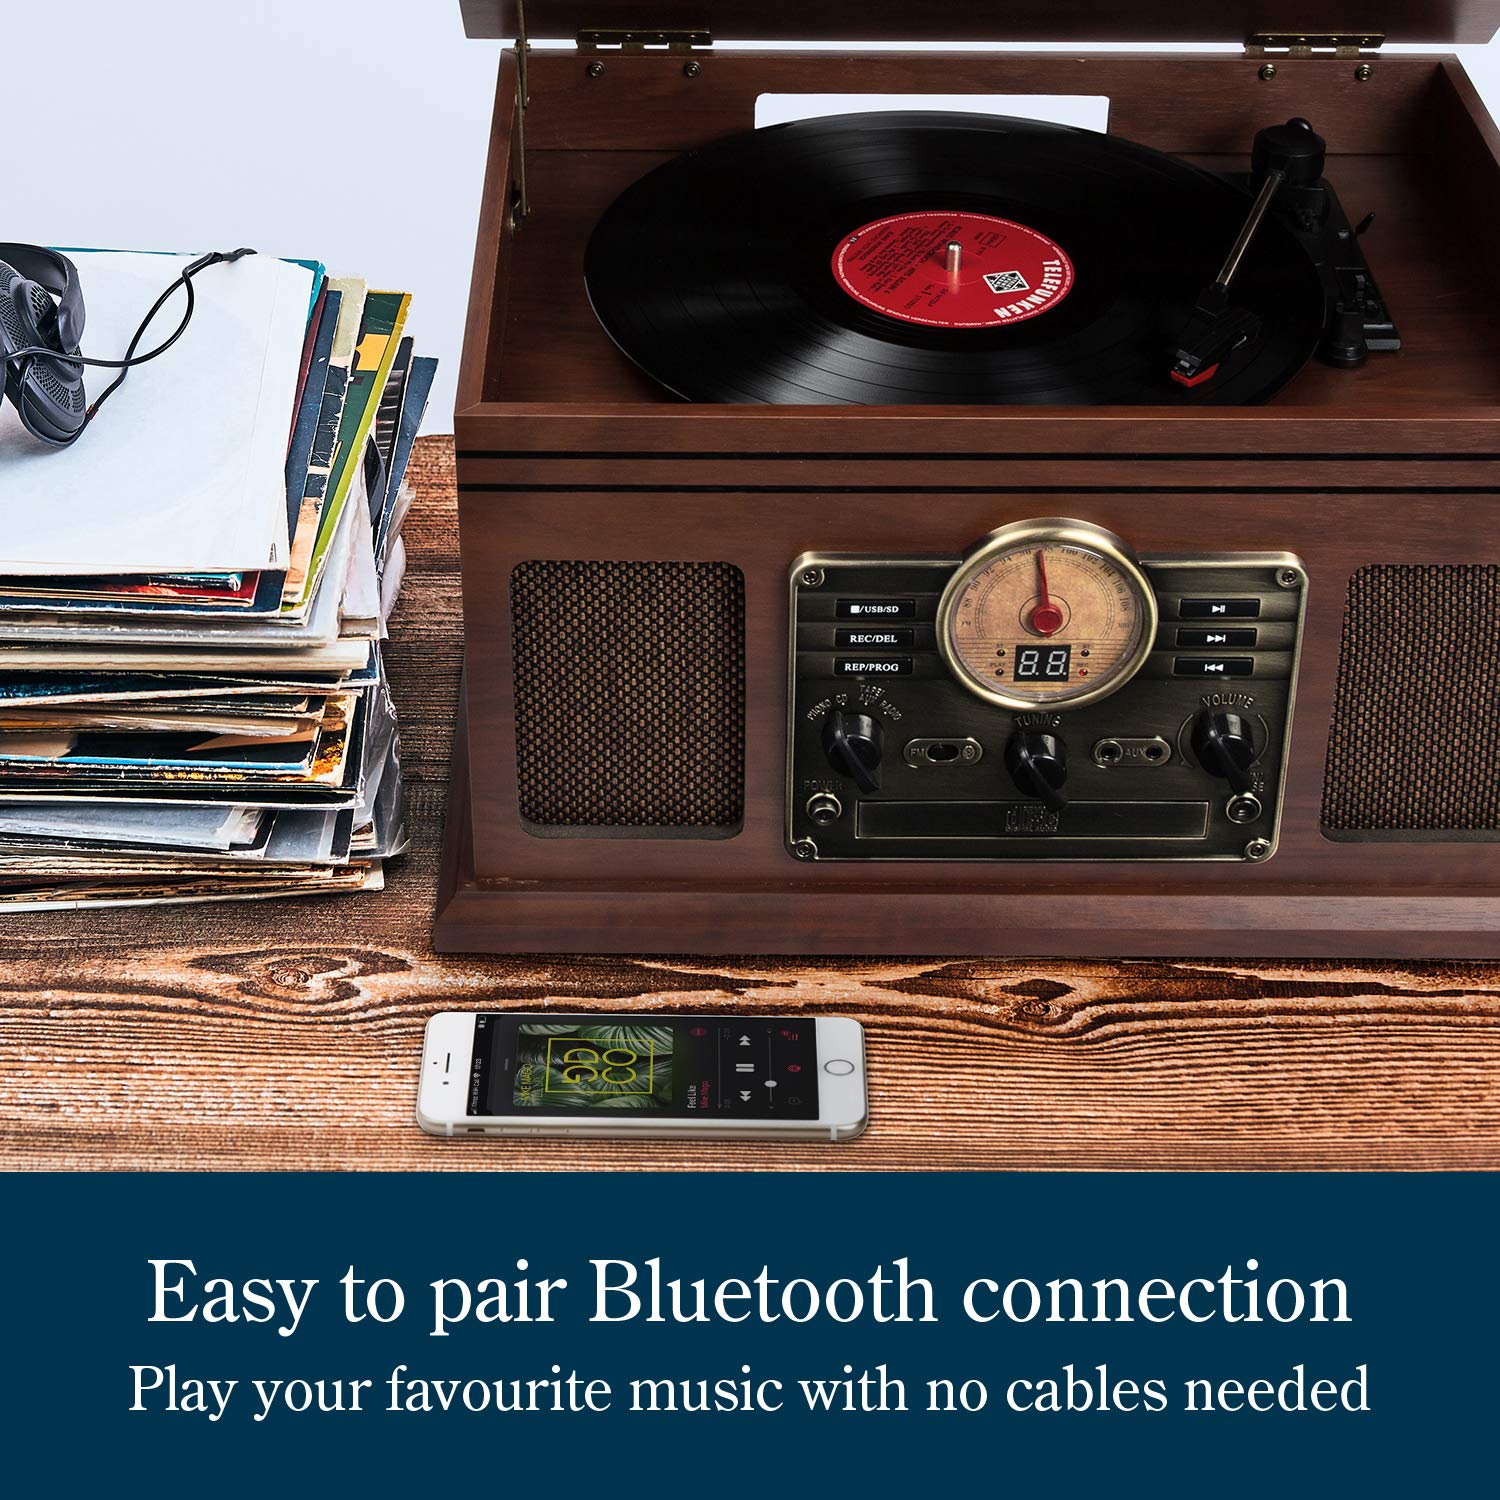 Record Player Vinyl Turntable with Speakers – USB MP3 Playback/Bluetooth/FM Radio/CD & Cassette Player/Vinyl LP Records/SD Card Reader